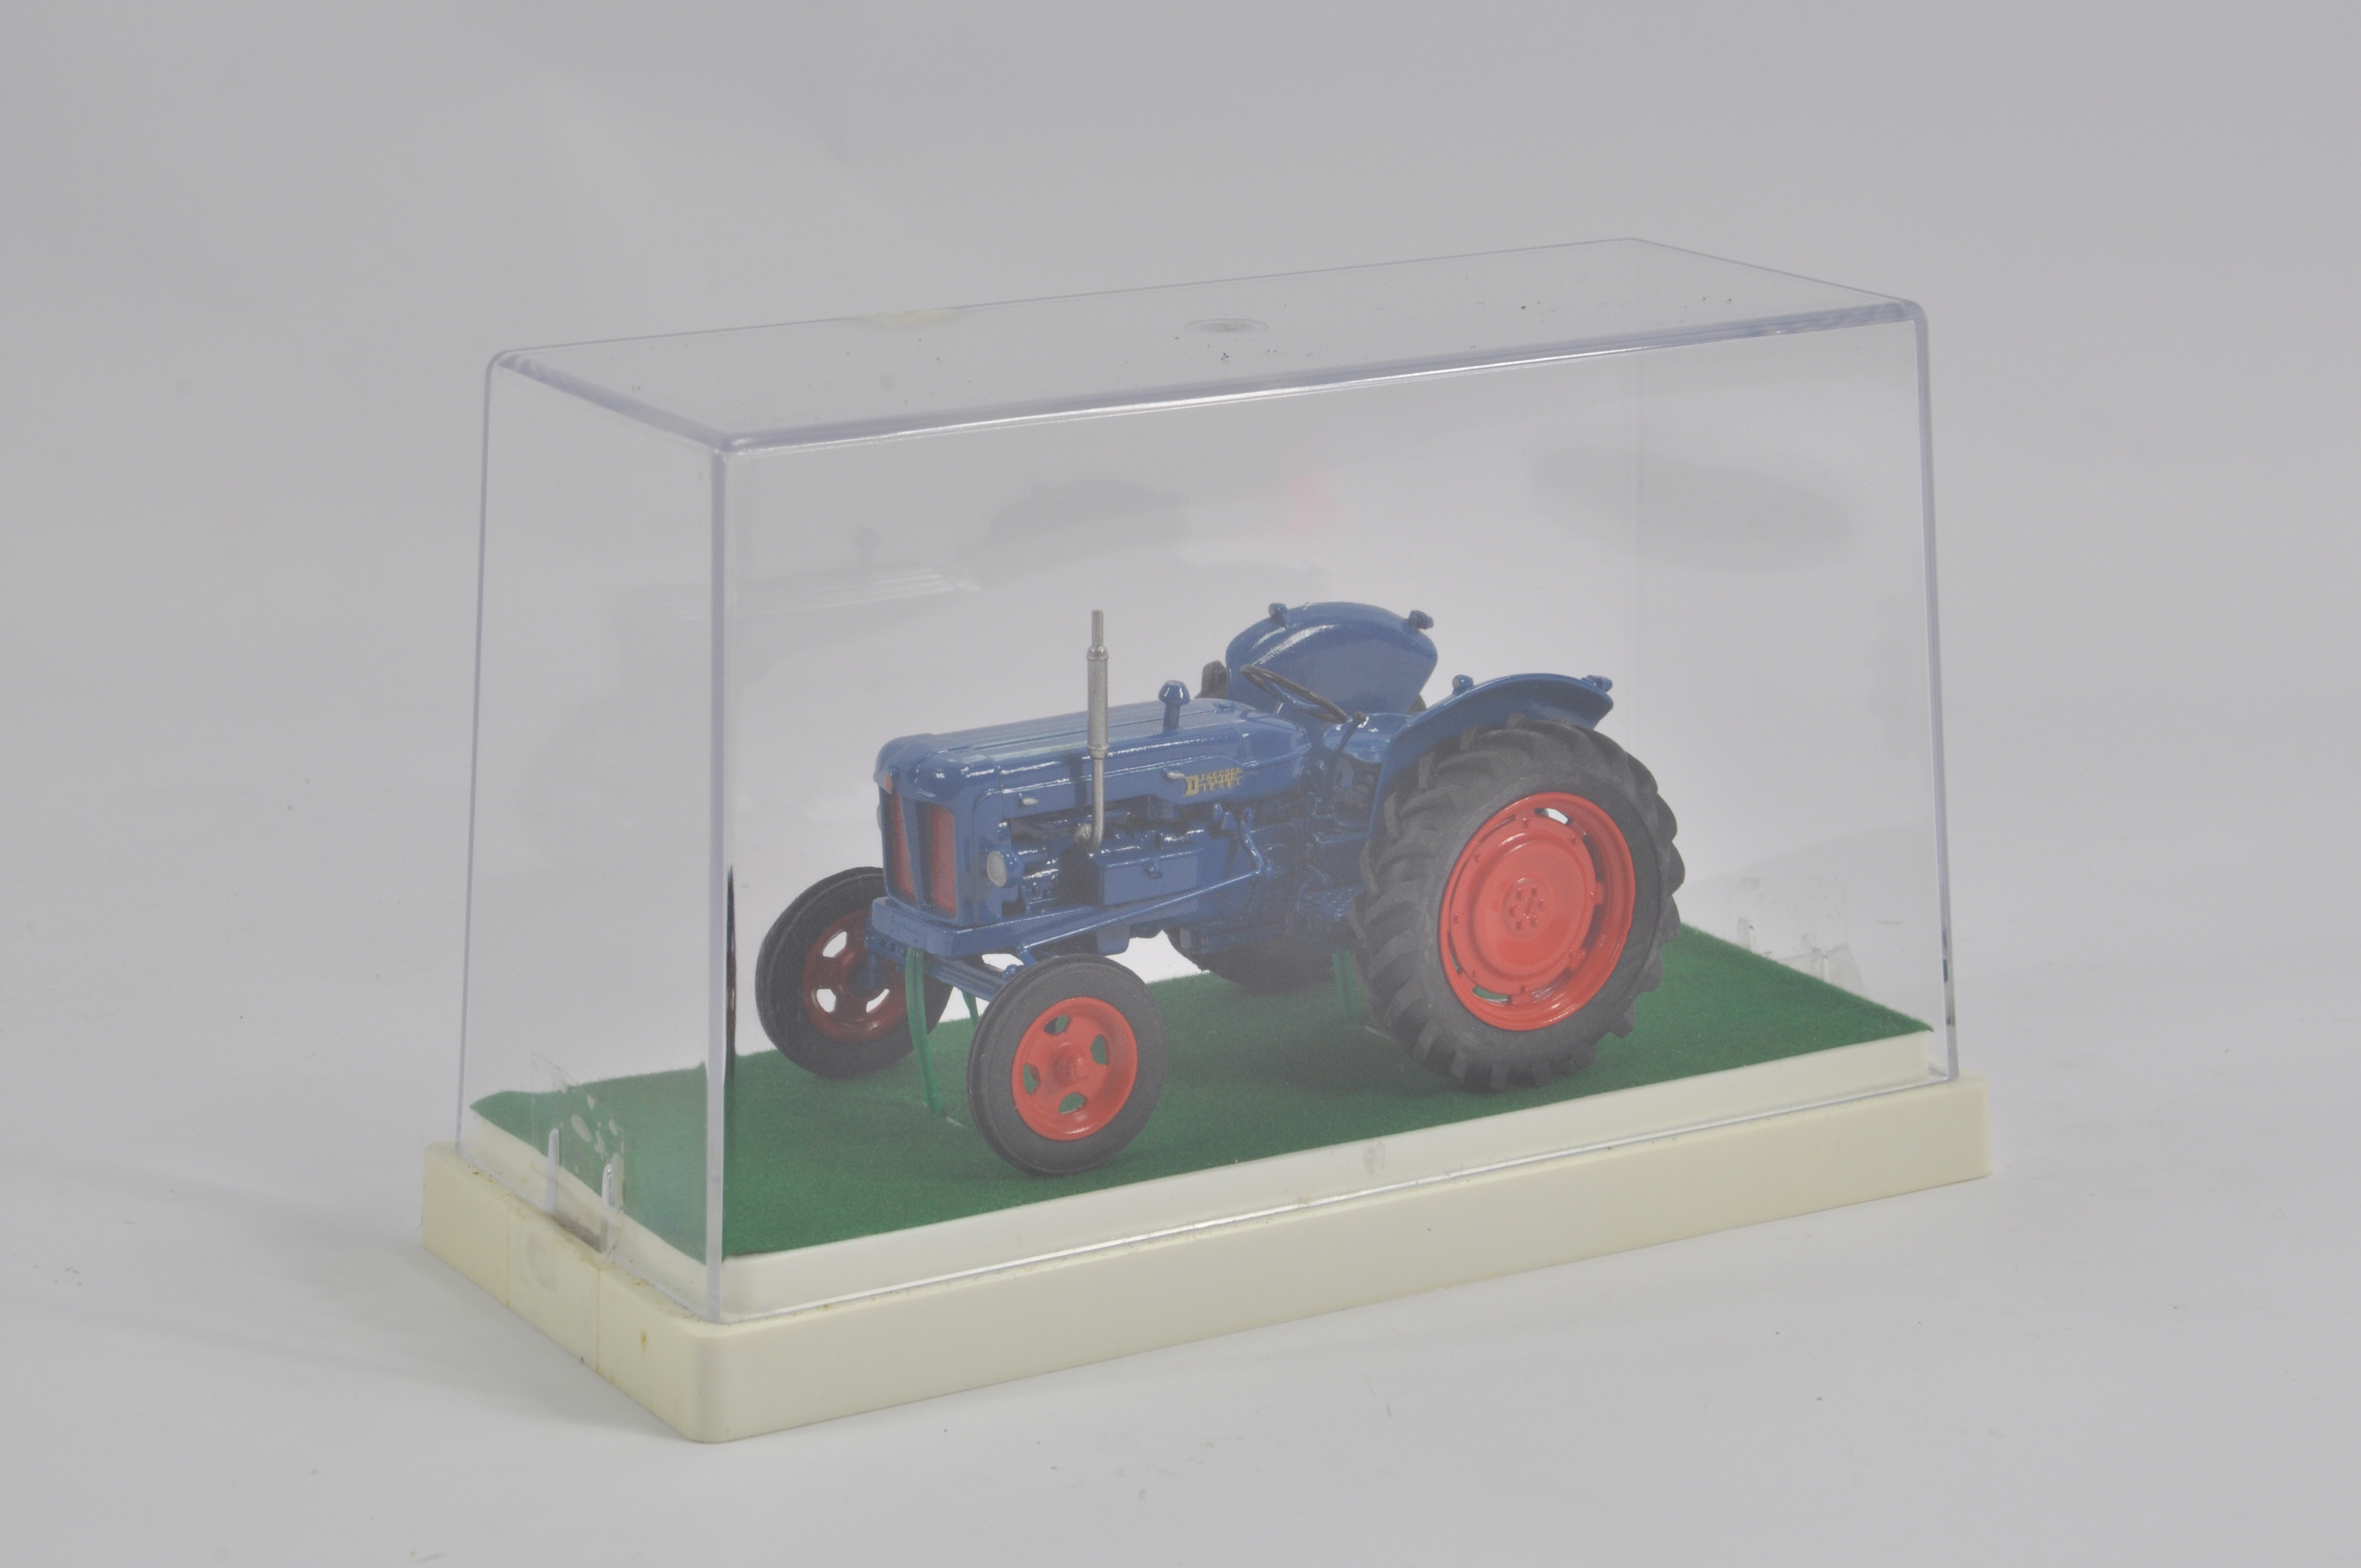 Finely built model in 1/32 scale of a 1953 Fordson Major Diesel Tractor. NM to M.